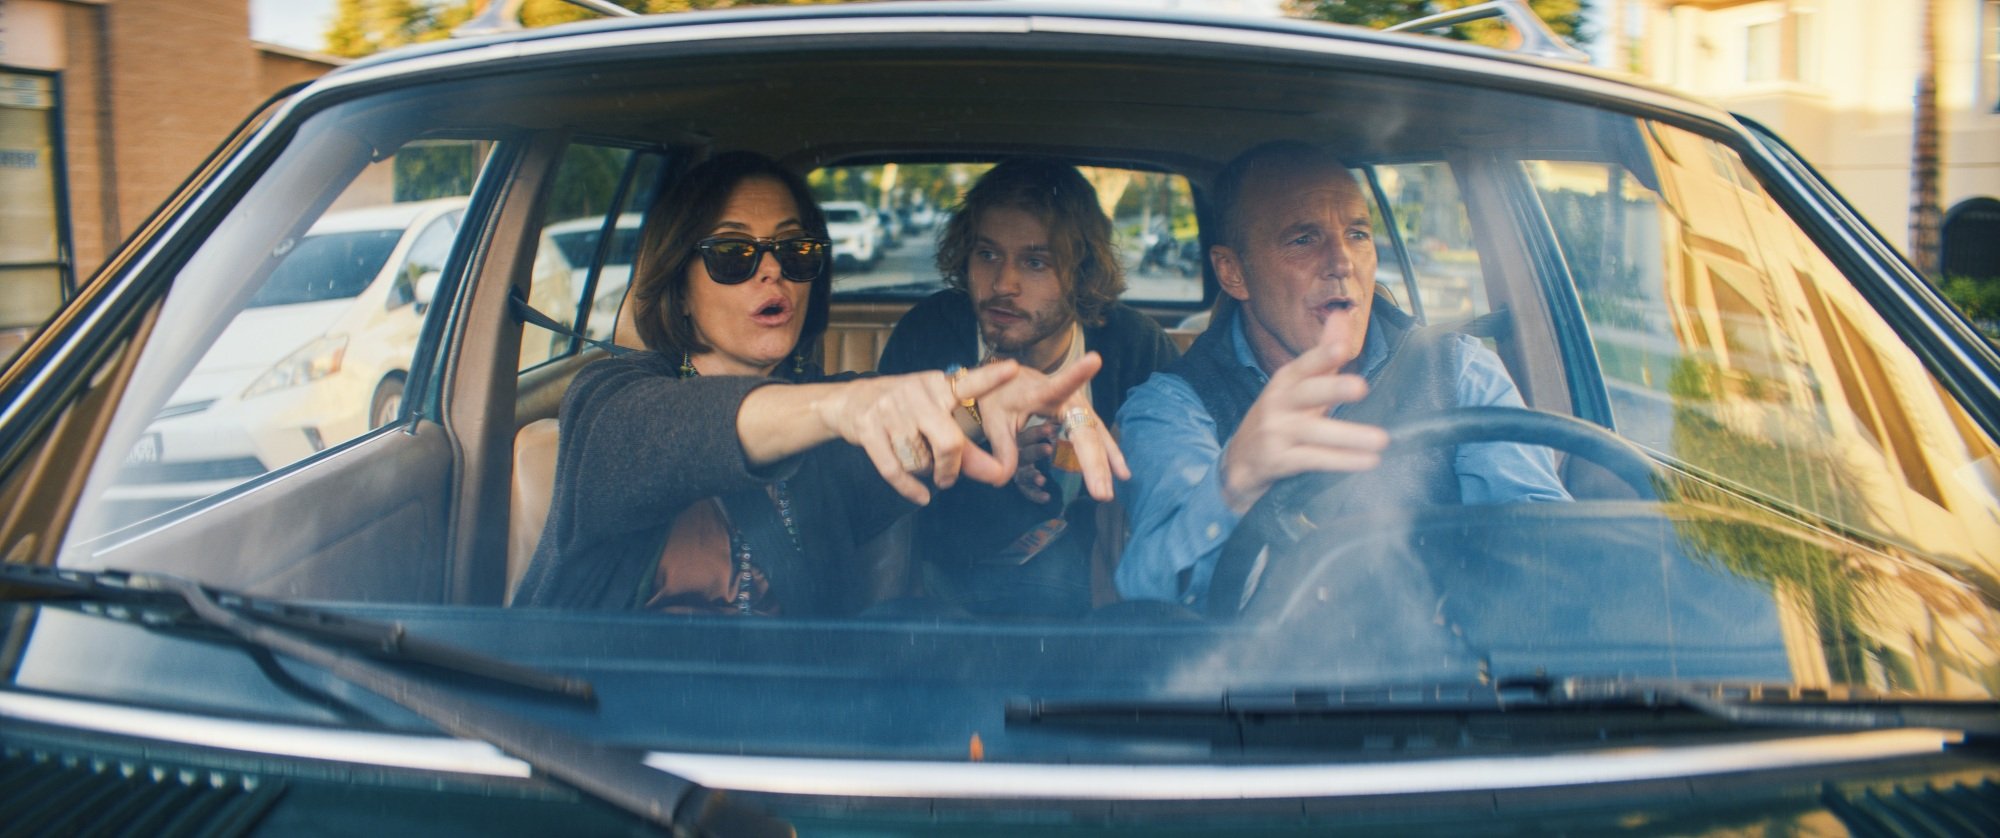 Parker Posey, Fred Hechinger, and Clark Gregg in "Thelma."